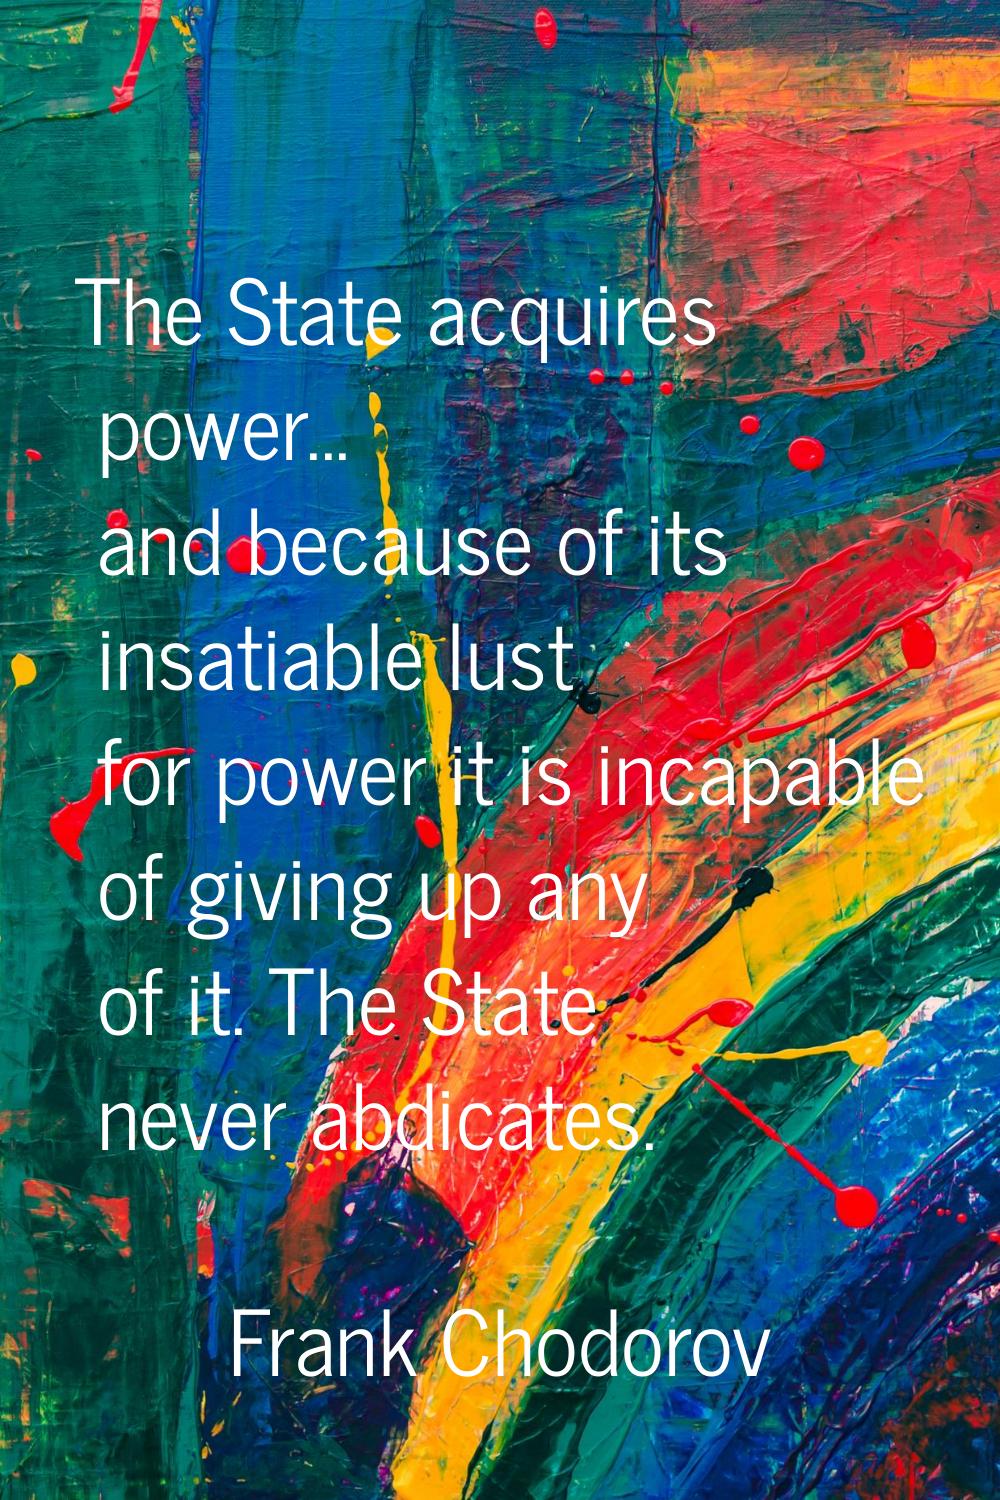 The State acquires power... and because of its insatiable lust for power it is incapable of giving 